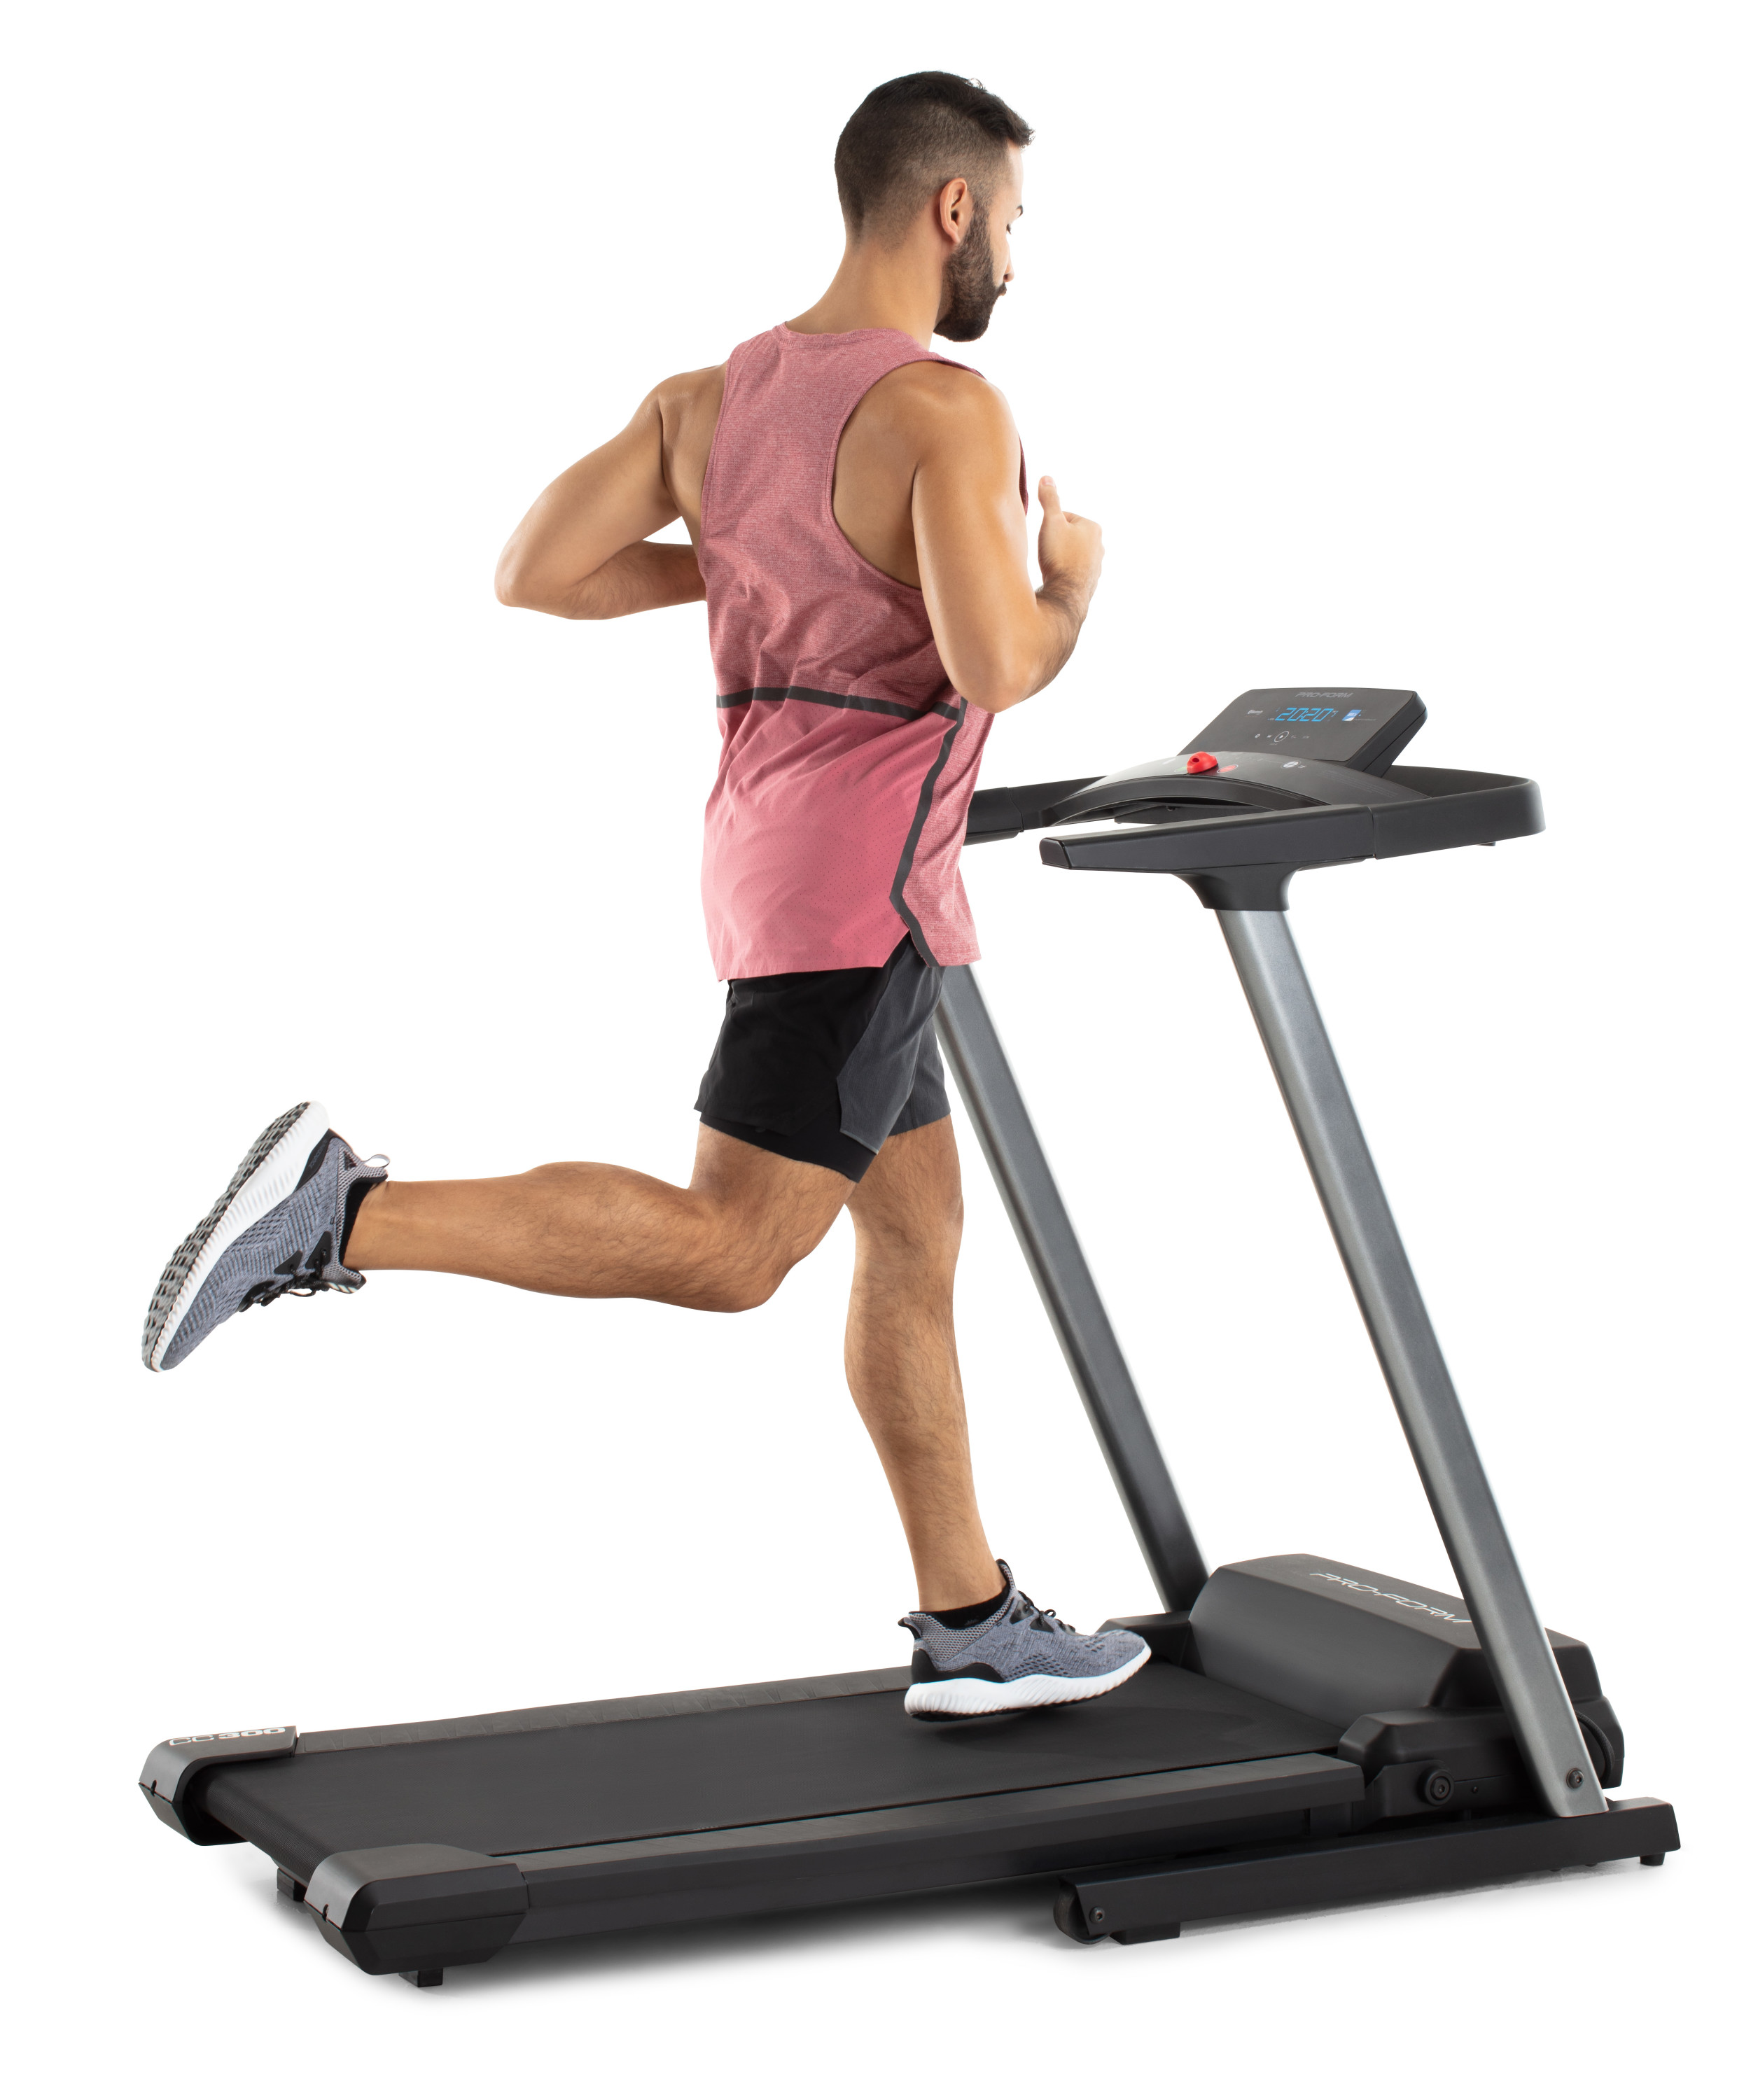 ProForm Cadence Compact 300 Folding Treadmill, Compatible with iFIT Personal Training - image 13 of 37